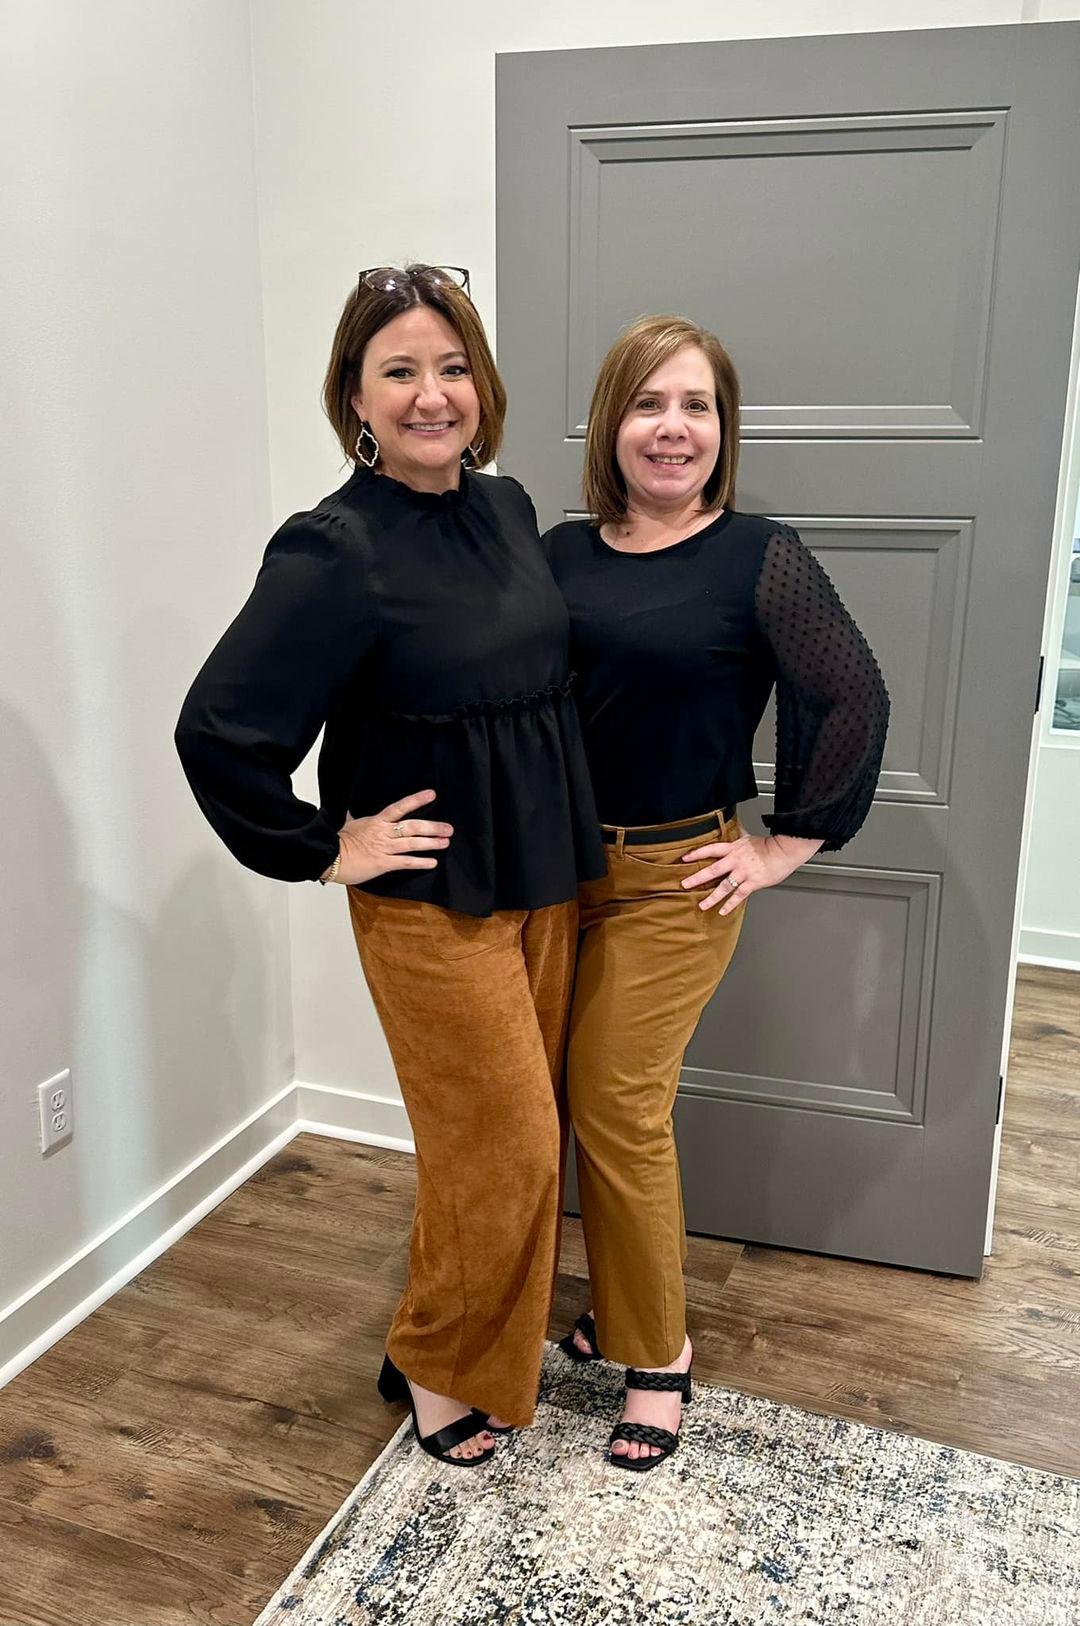 Unplanned twin day! We all think too much alike! Jennifer Mabou - State Farm Insurance Agent Sulphur (337)527-0027